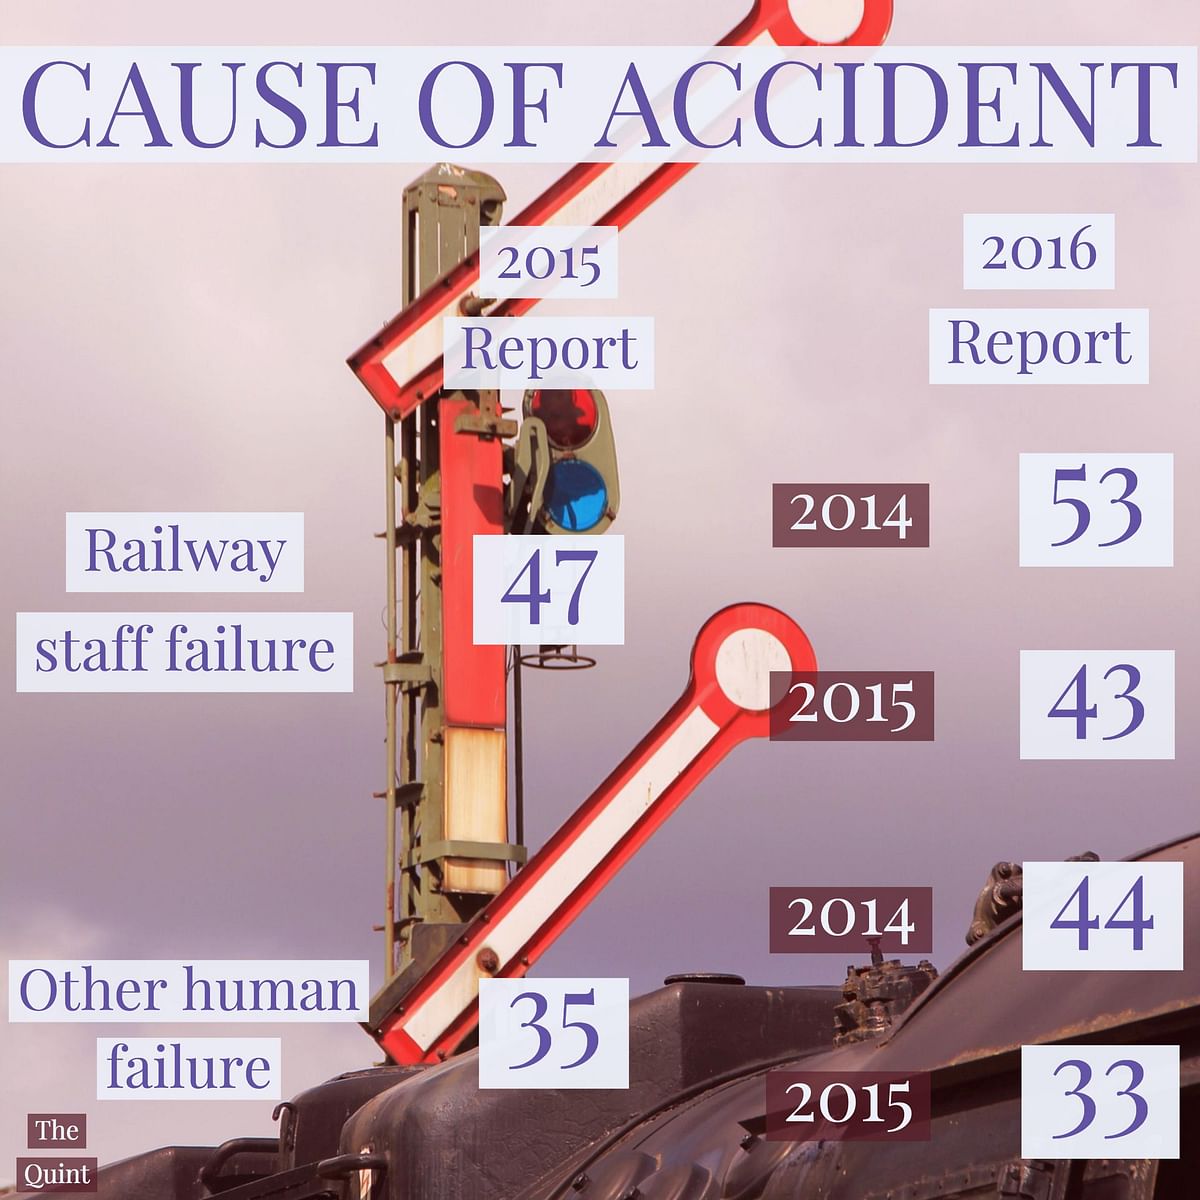 Indian trains were responsible for multiple fatalities in 2016. What is the cause behind them?